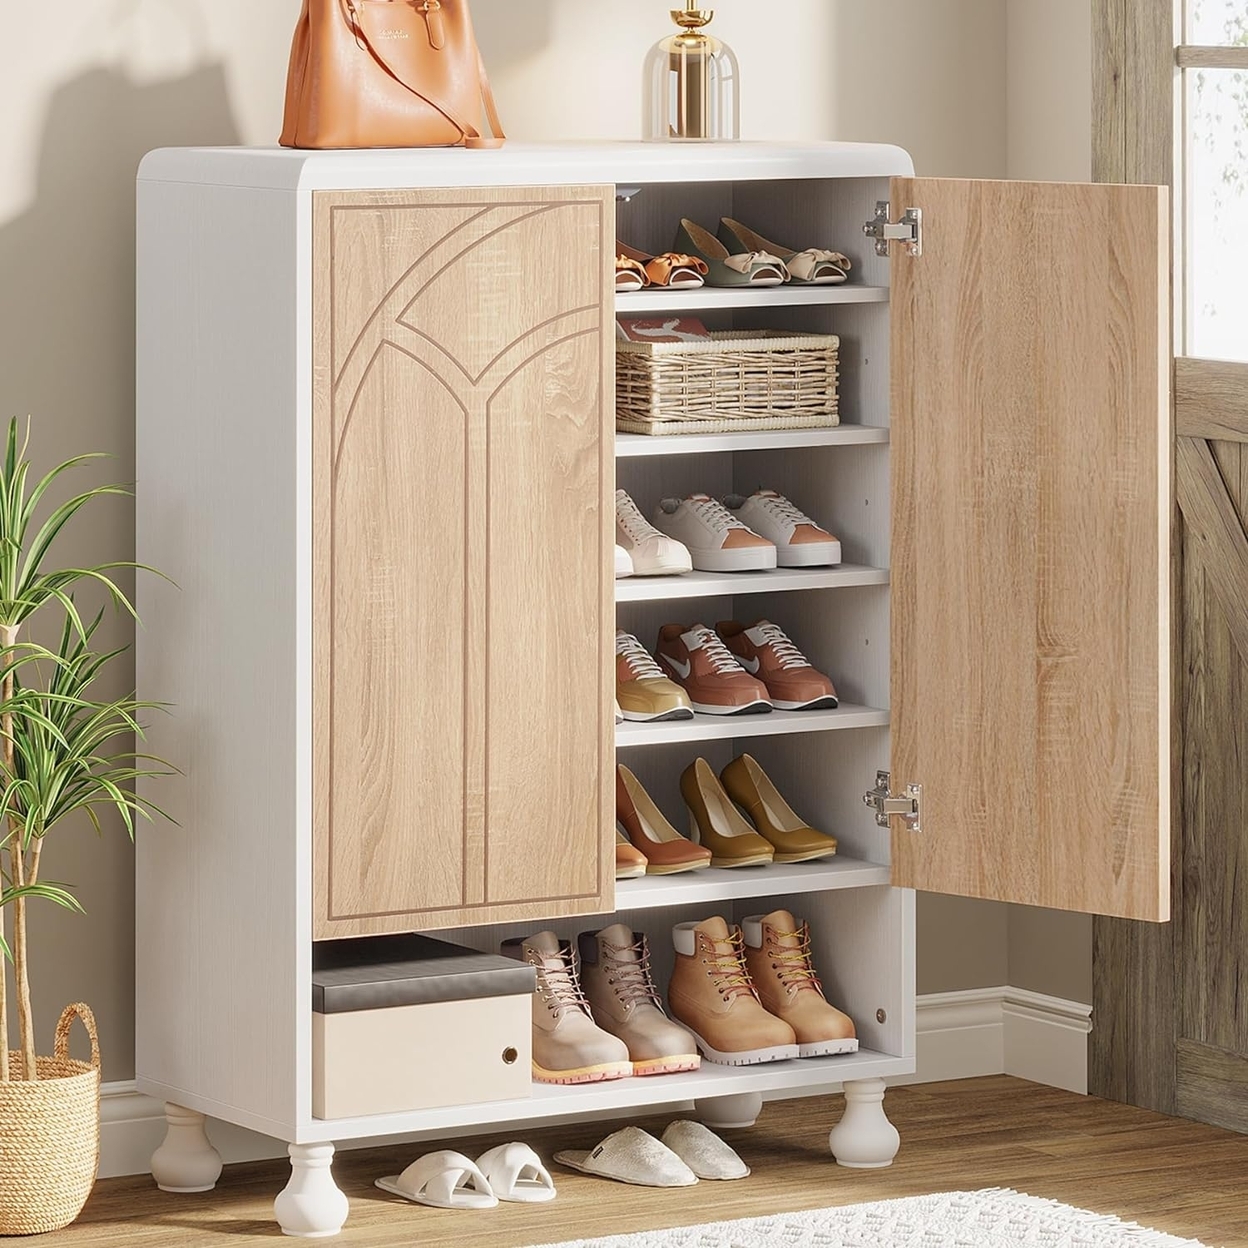 Tribesigns Shoe Storage Cabinet, 24 Shoes Organizer Cabinet With Door, White Freestanding Shoe Storage, 6 Tiers Modern Wood Shoe Rack